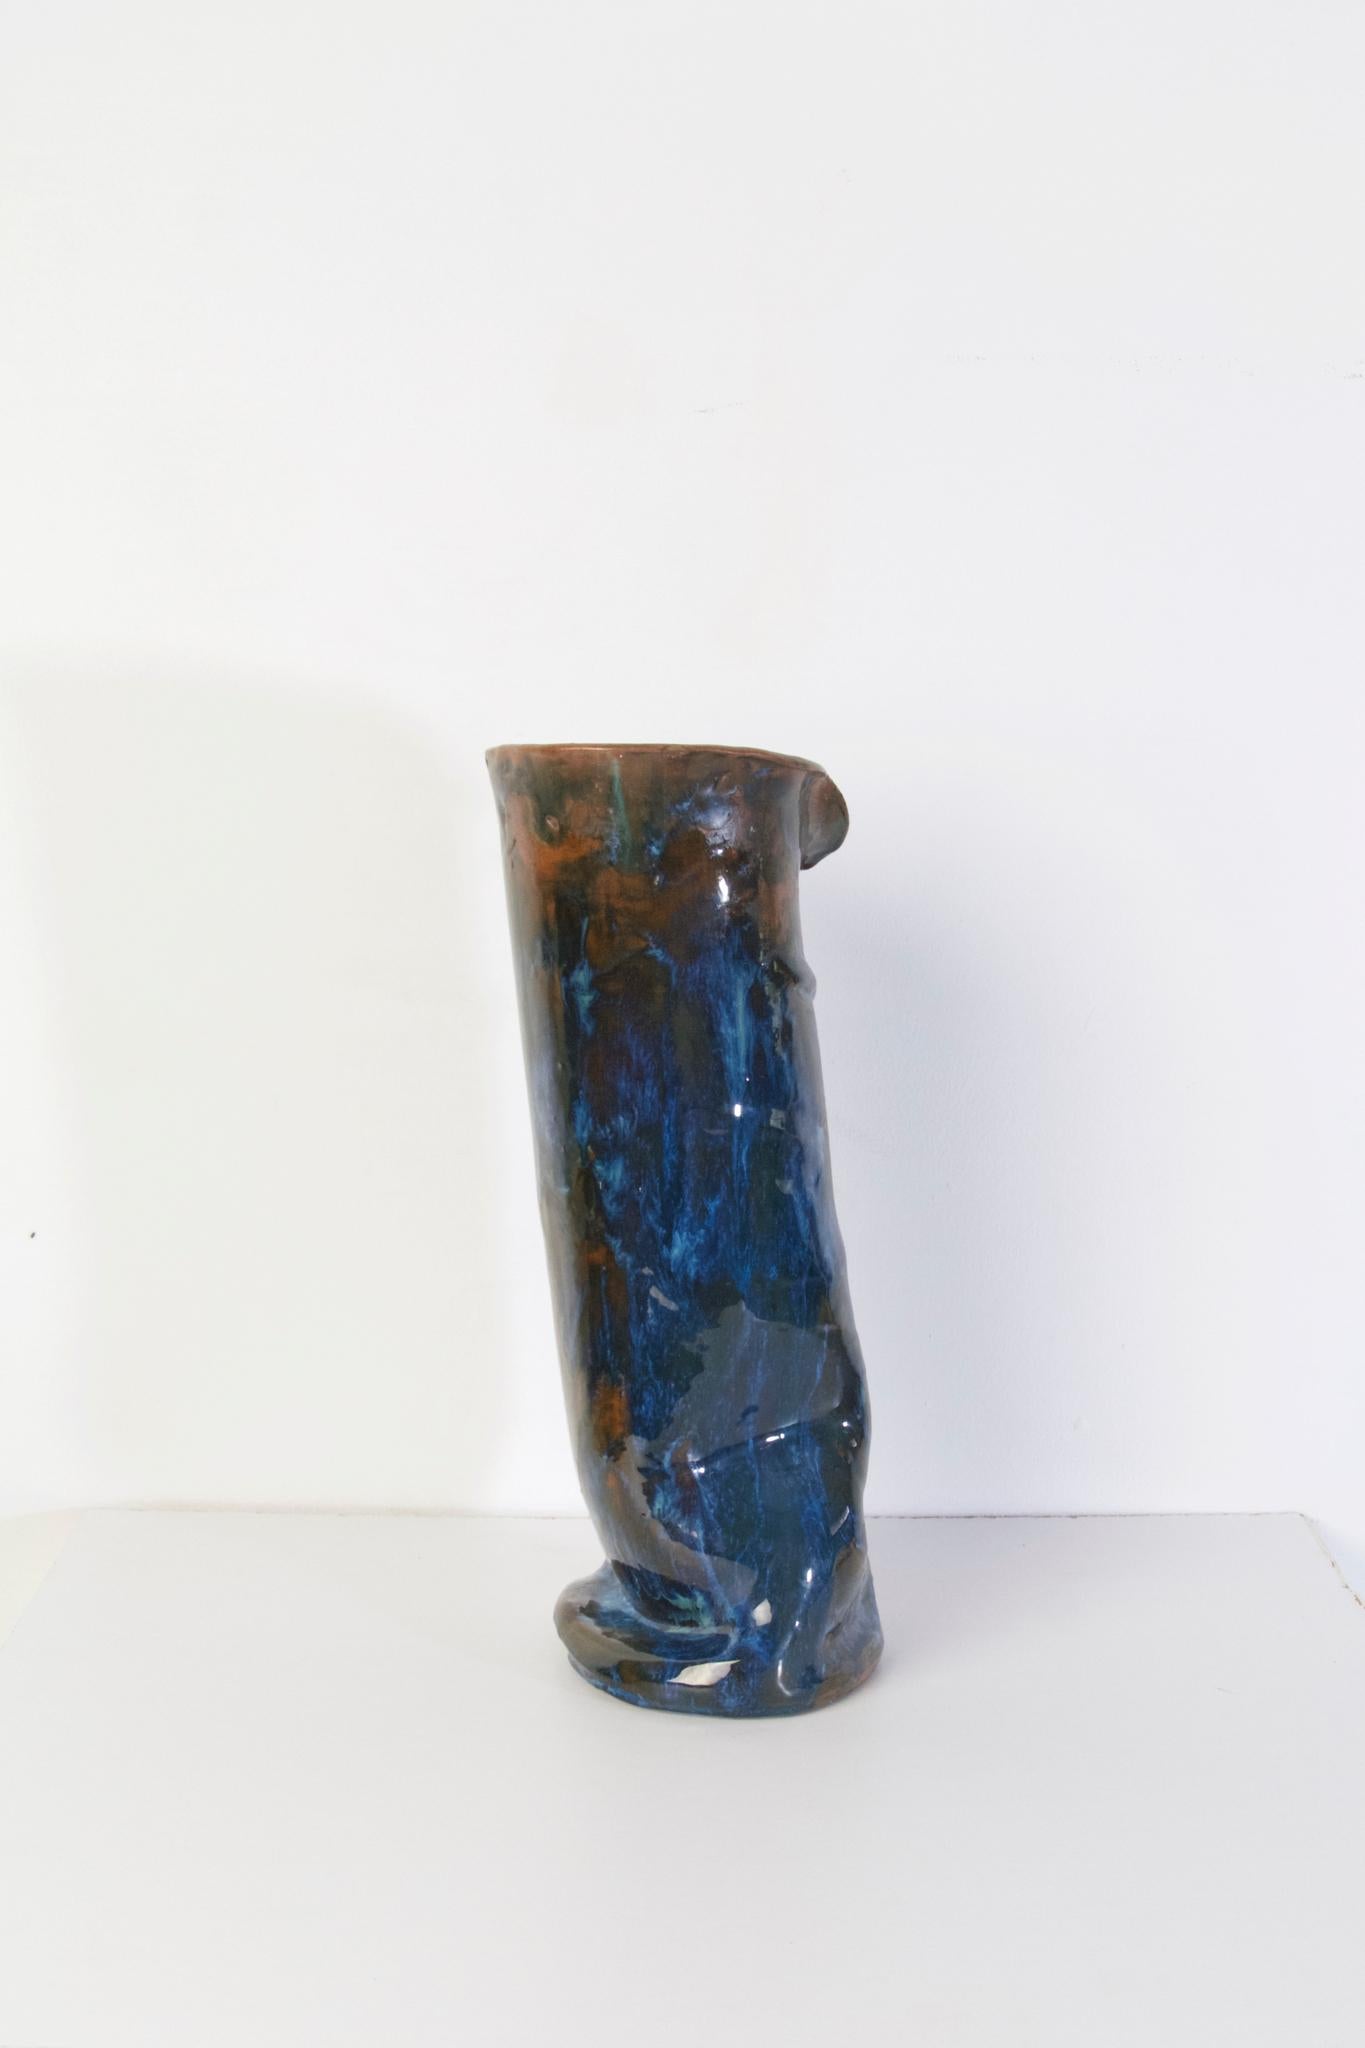 A large studio handmade ceramic vase in blue and brown glaze. Marked underneath with the initials A.M. 1969.